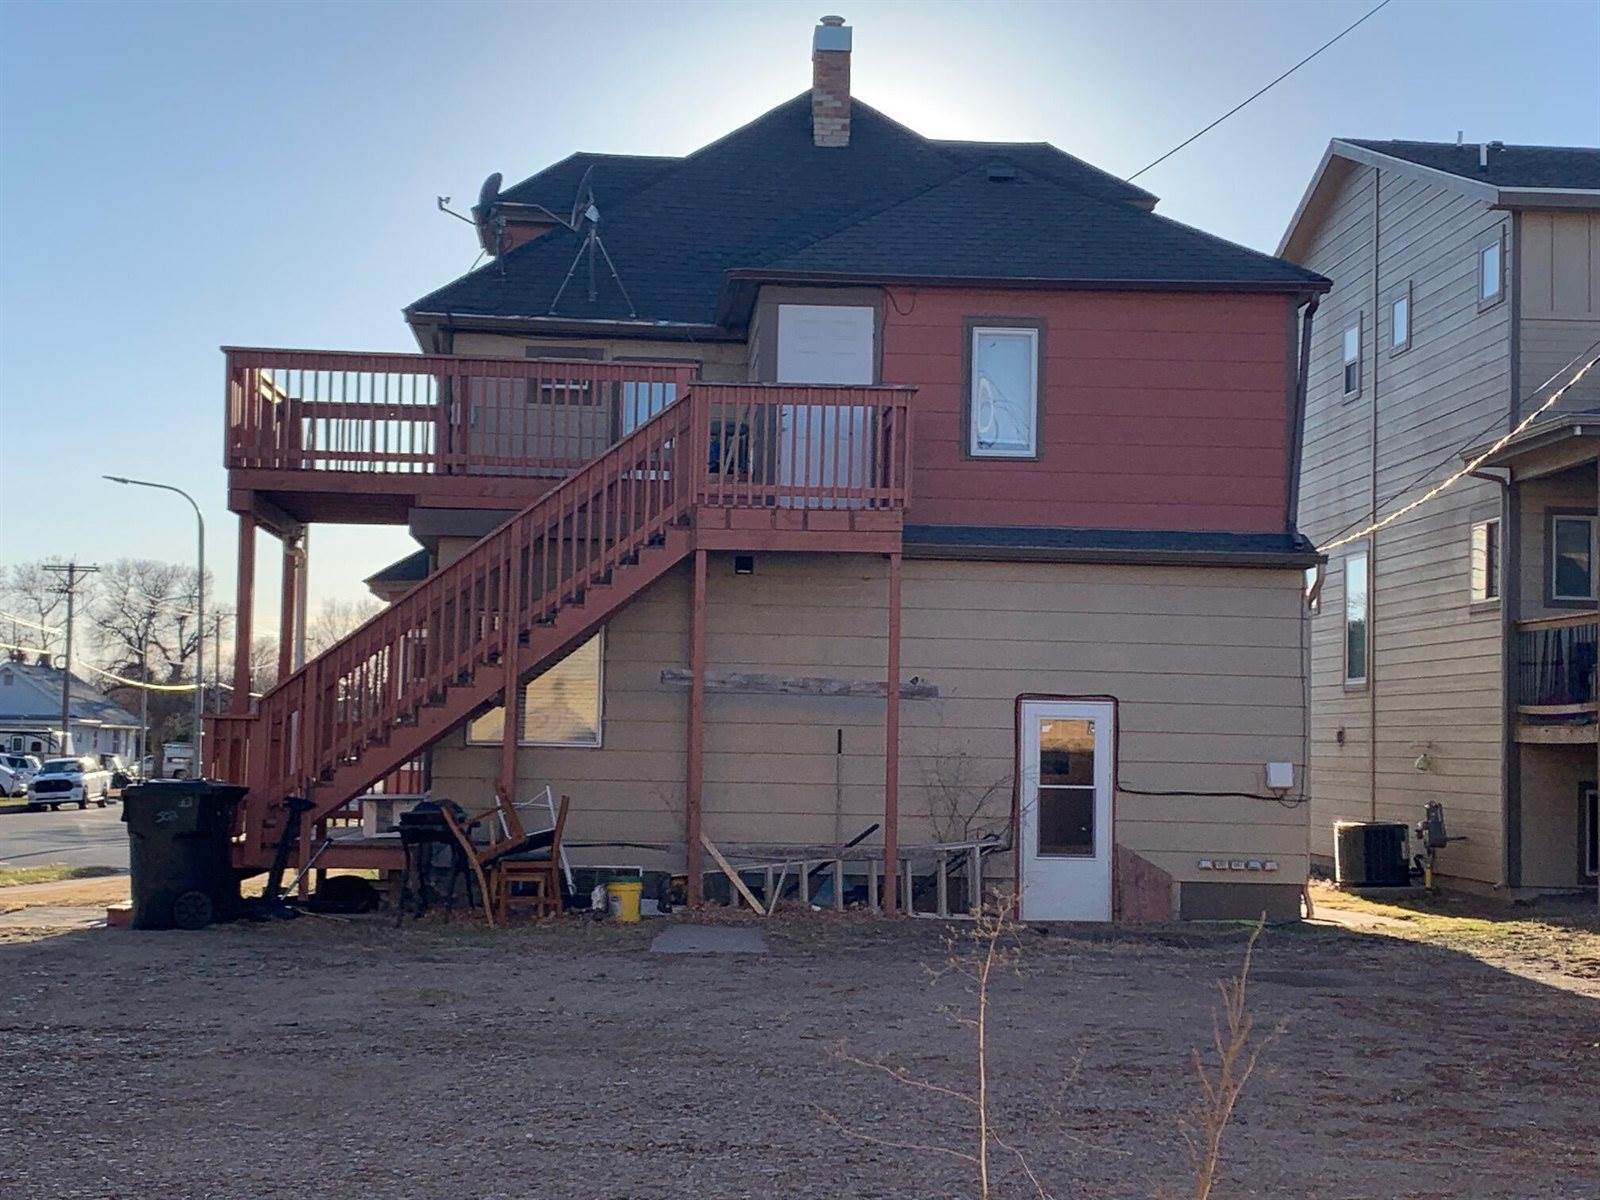 502A 1st Ave West, Williston, ND 58801